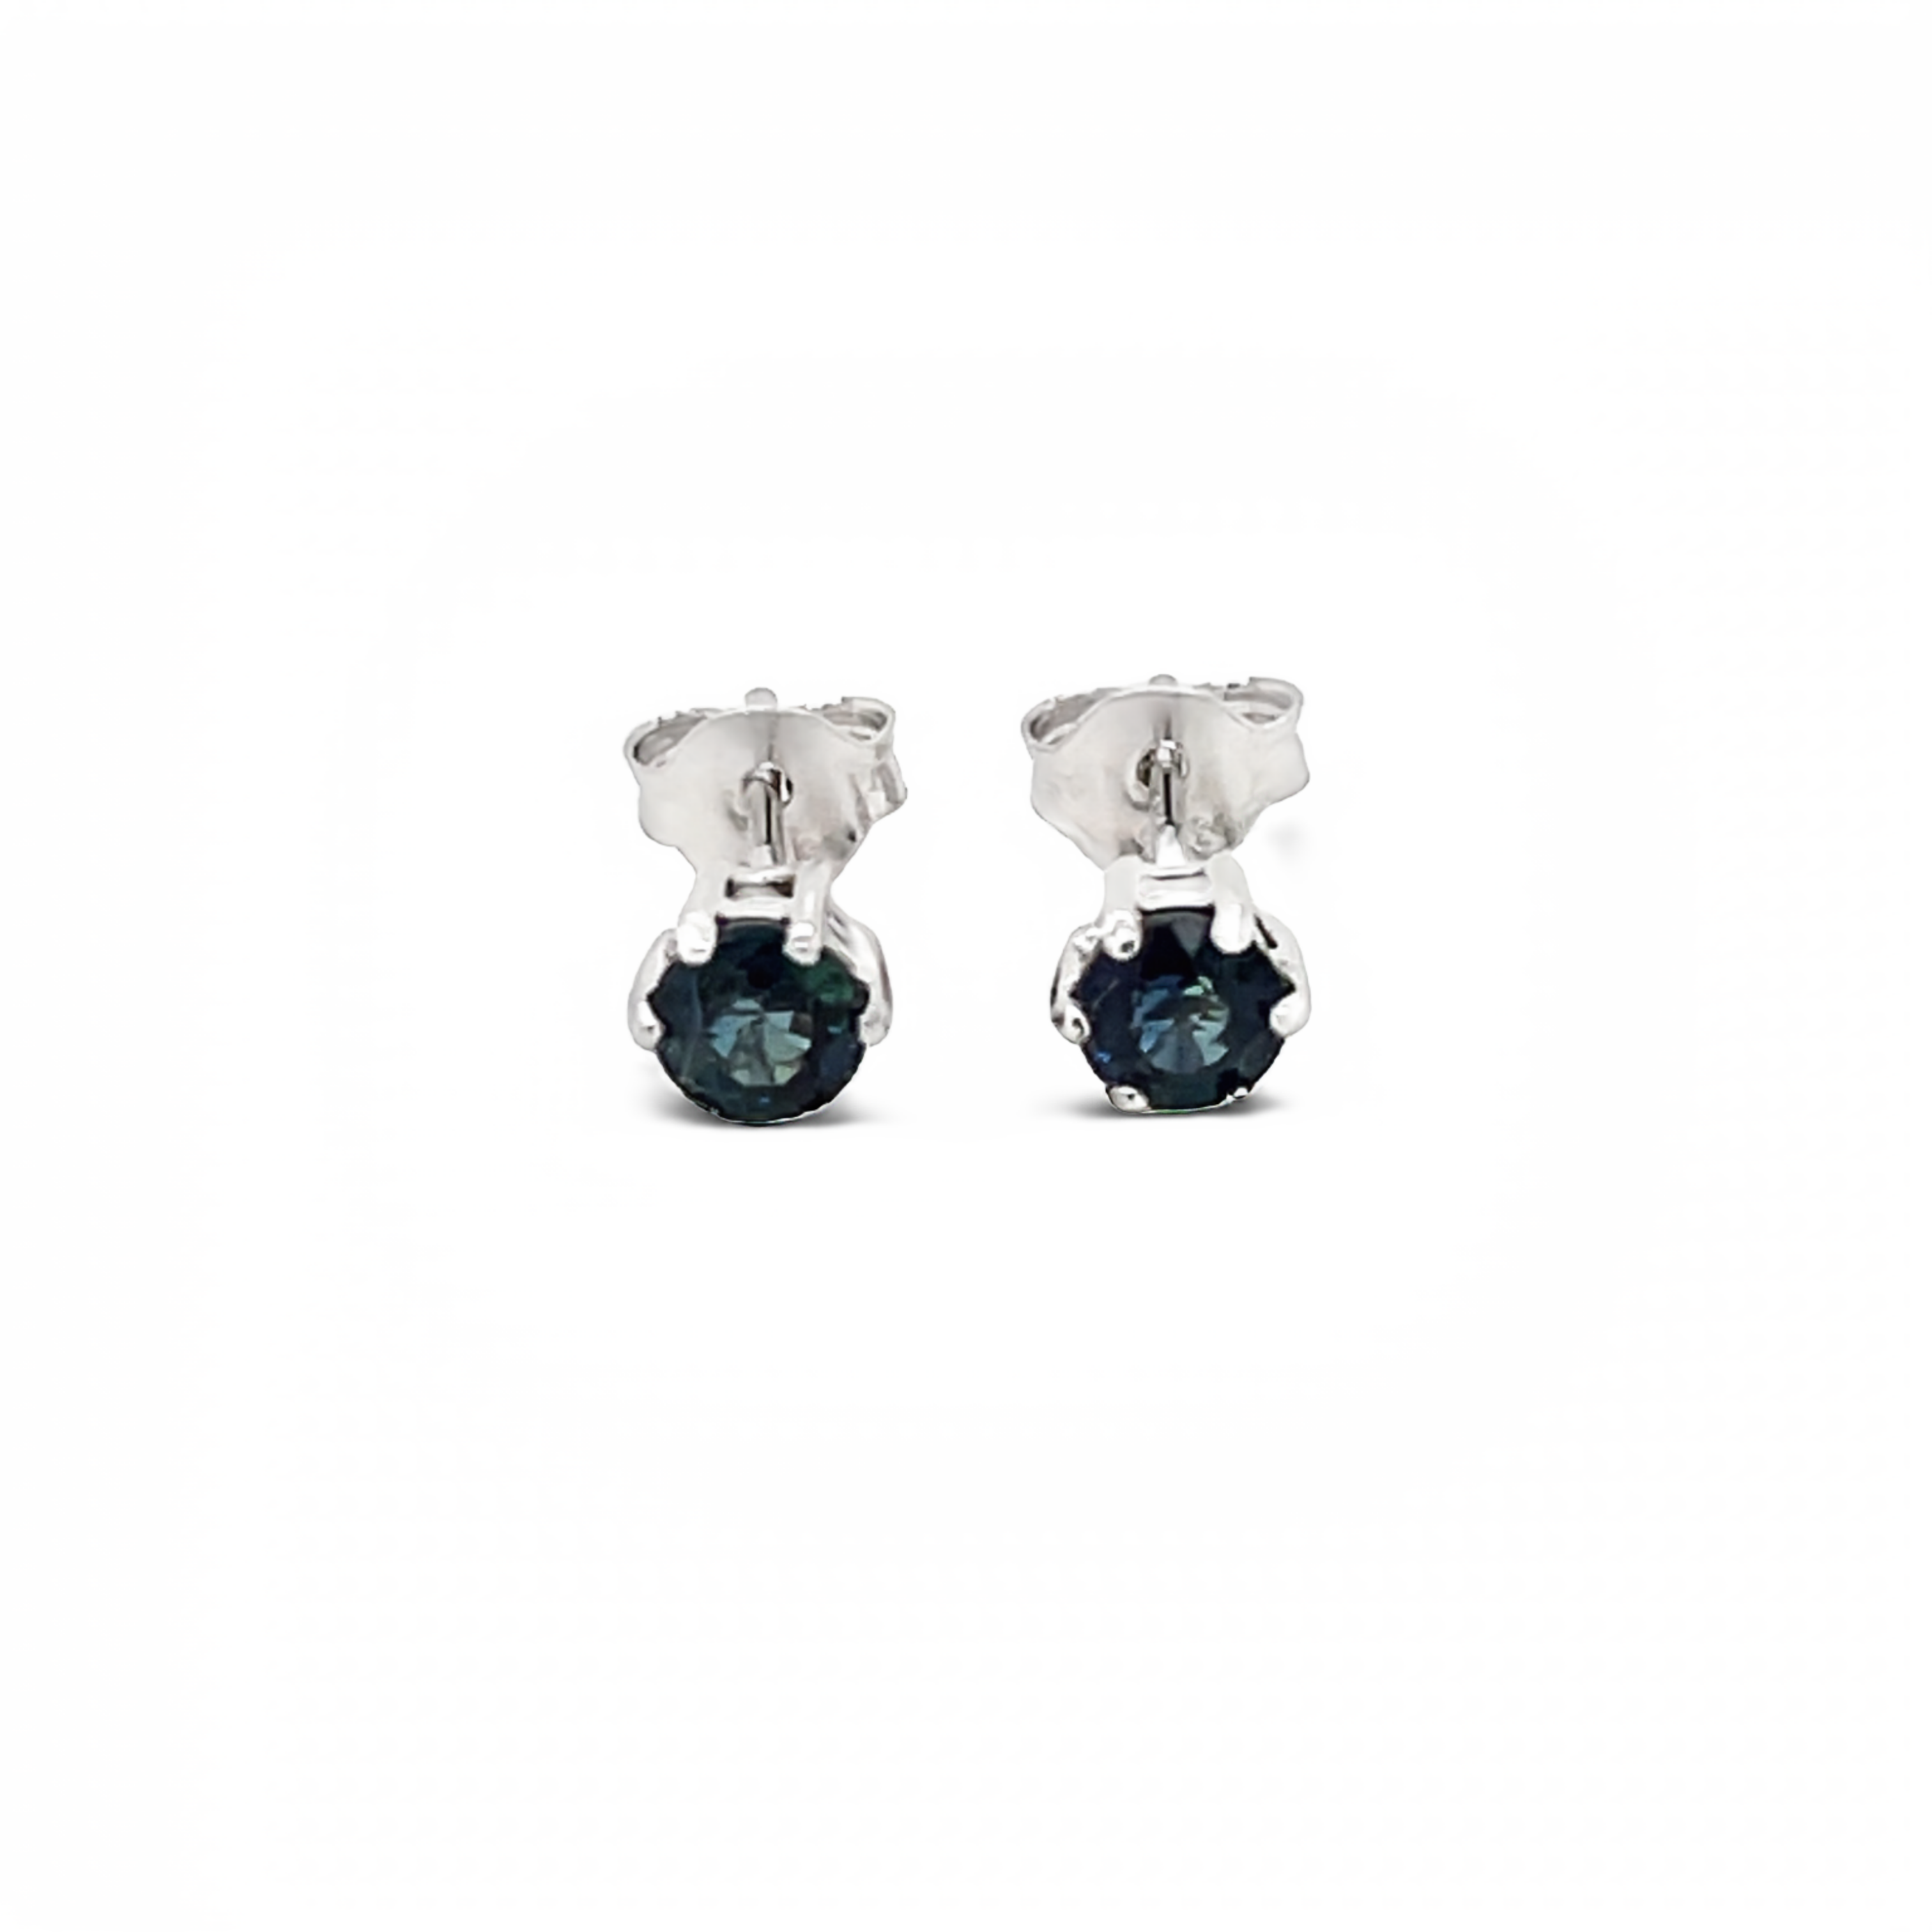 9ct White Gold 6 Claw Sapphire Stud Earrings